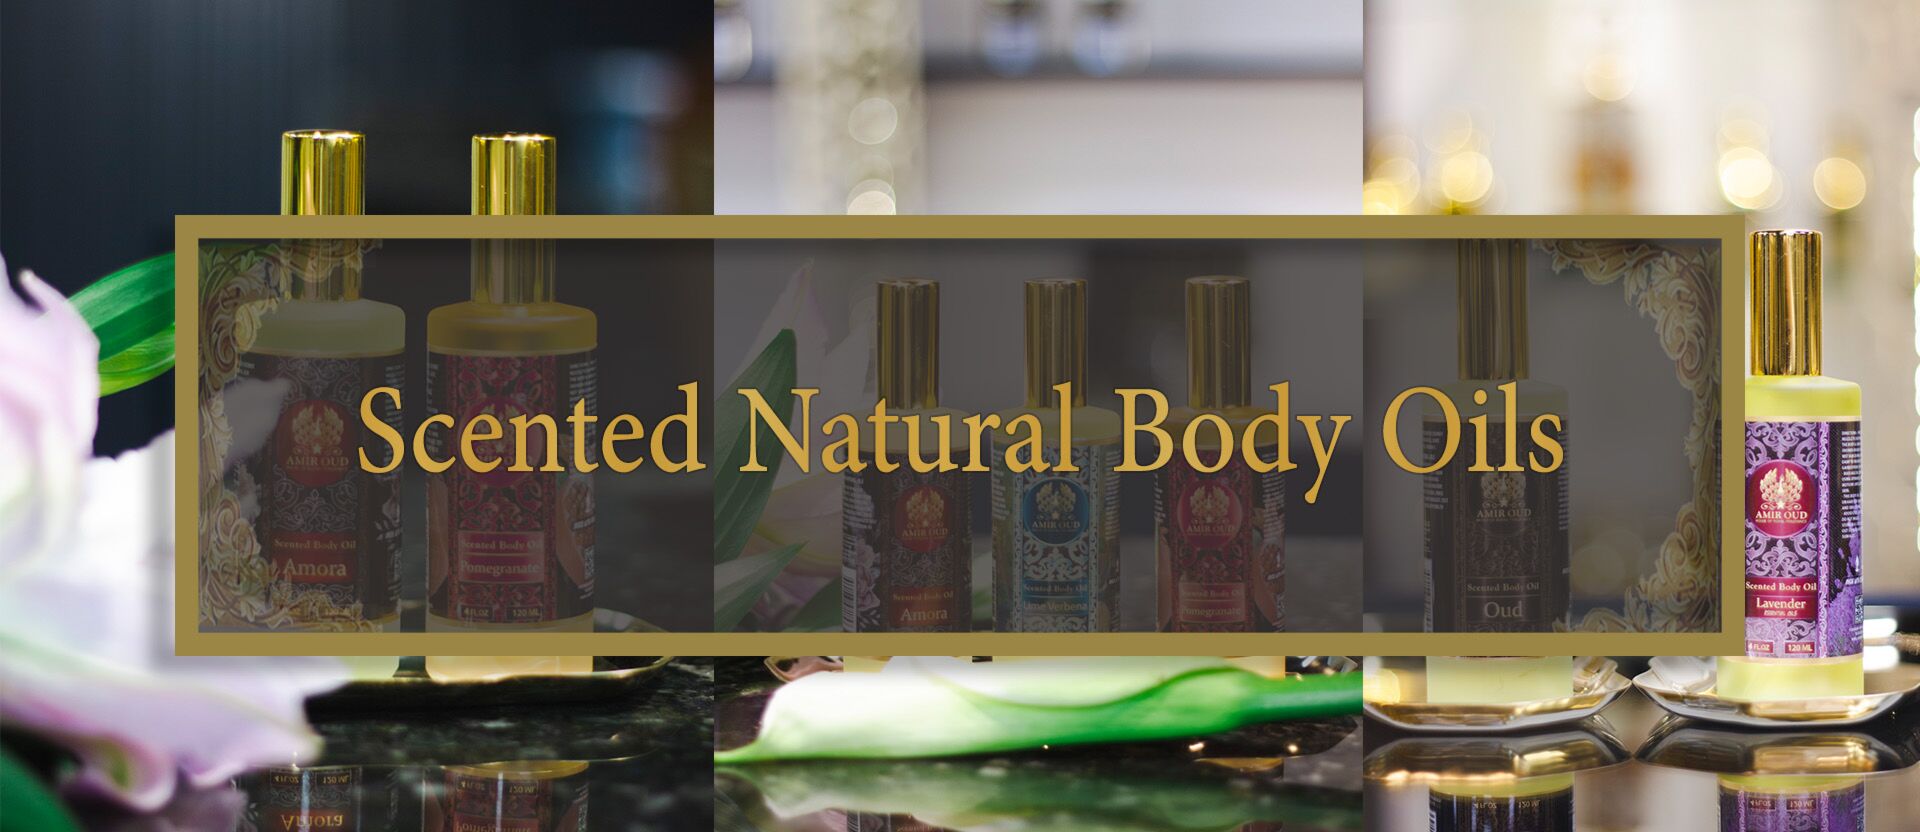 Scented Natural Body Oils